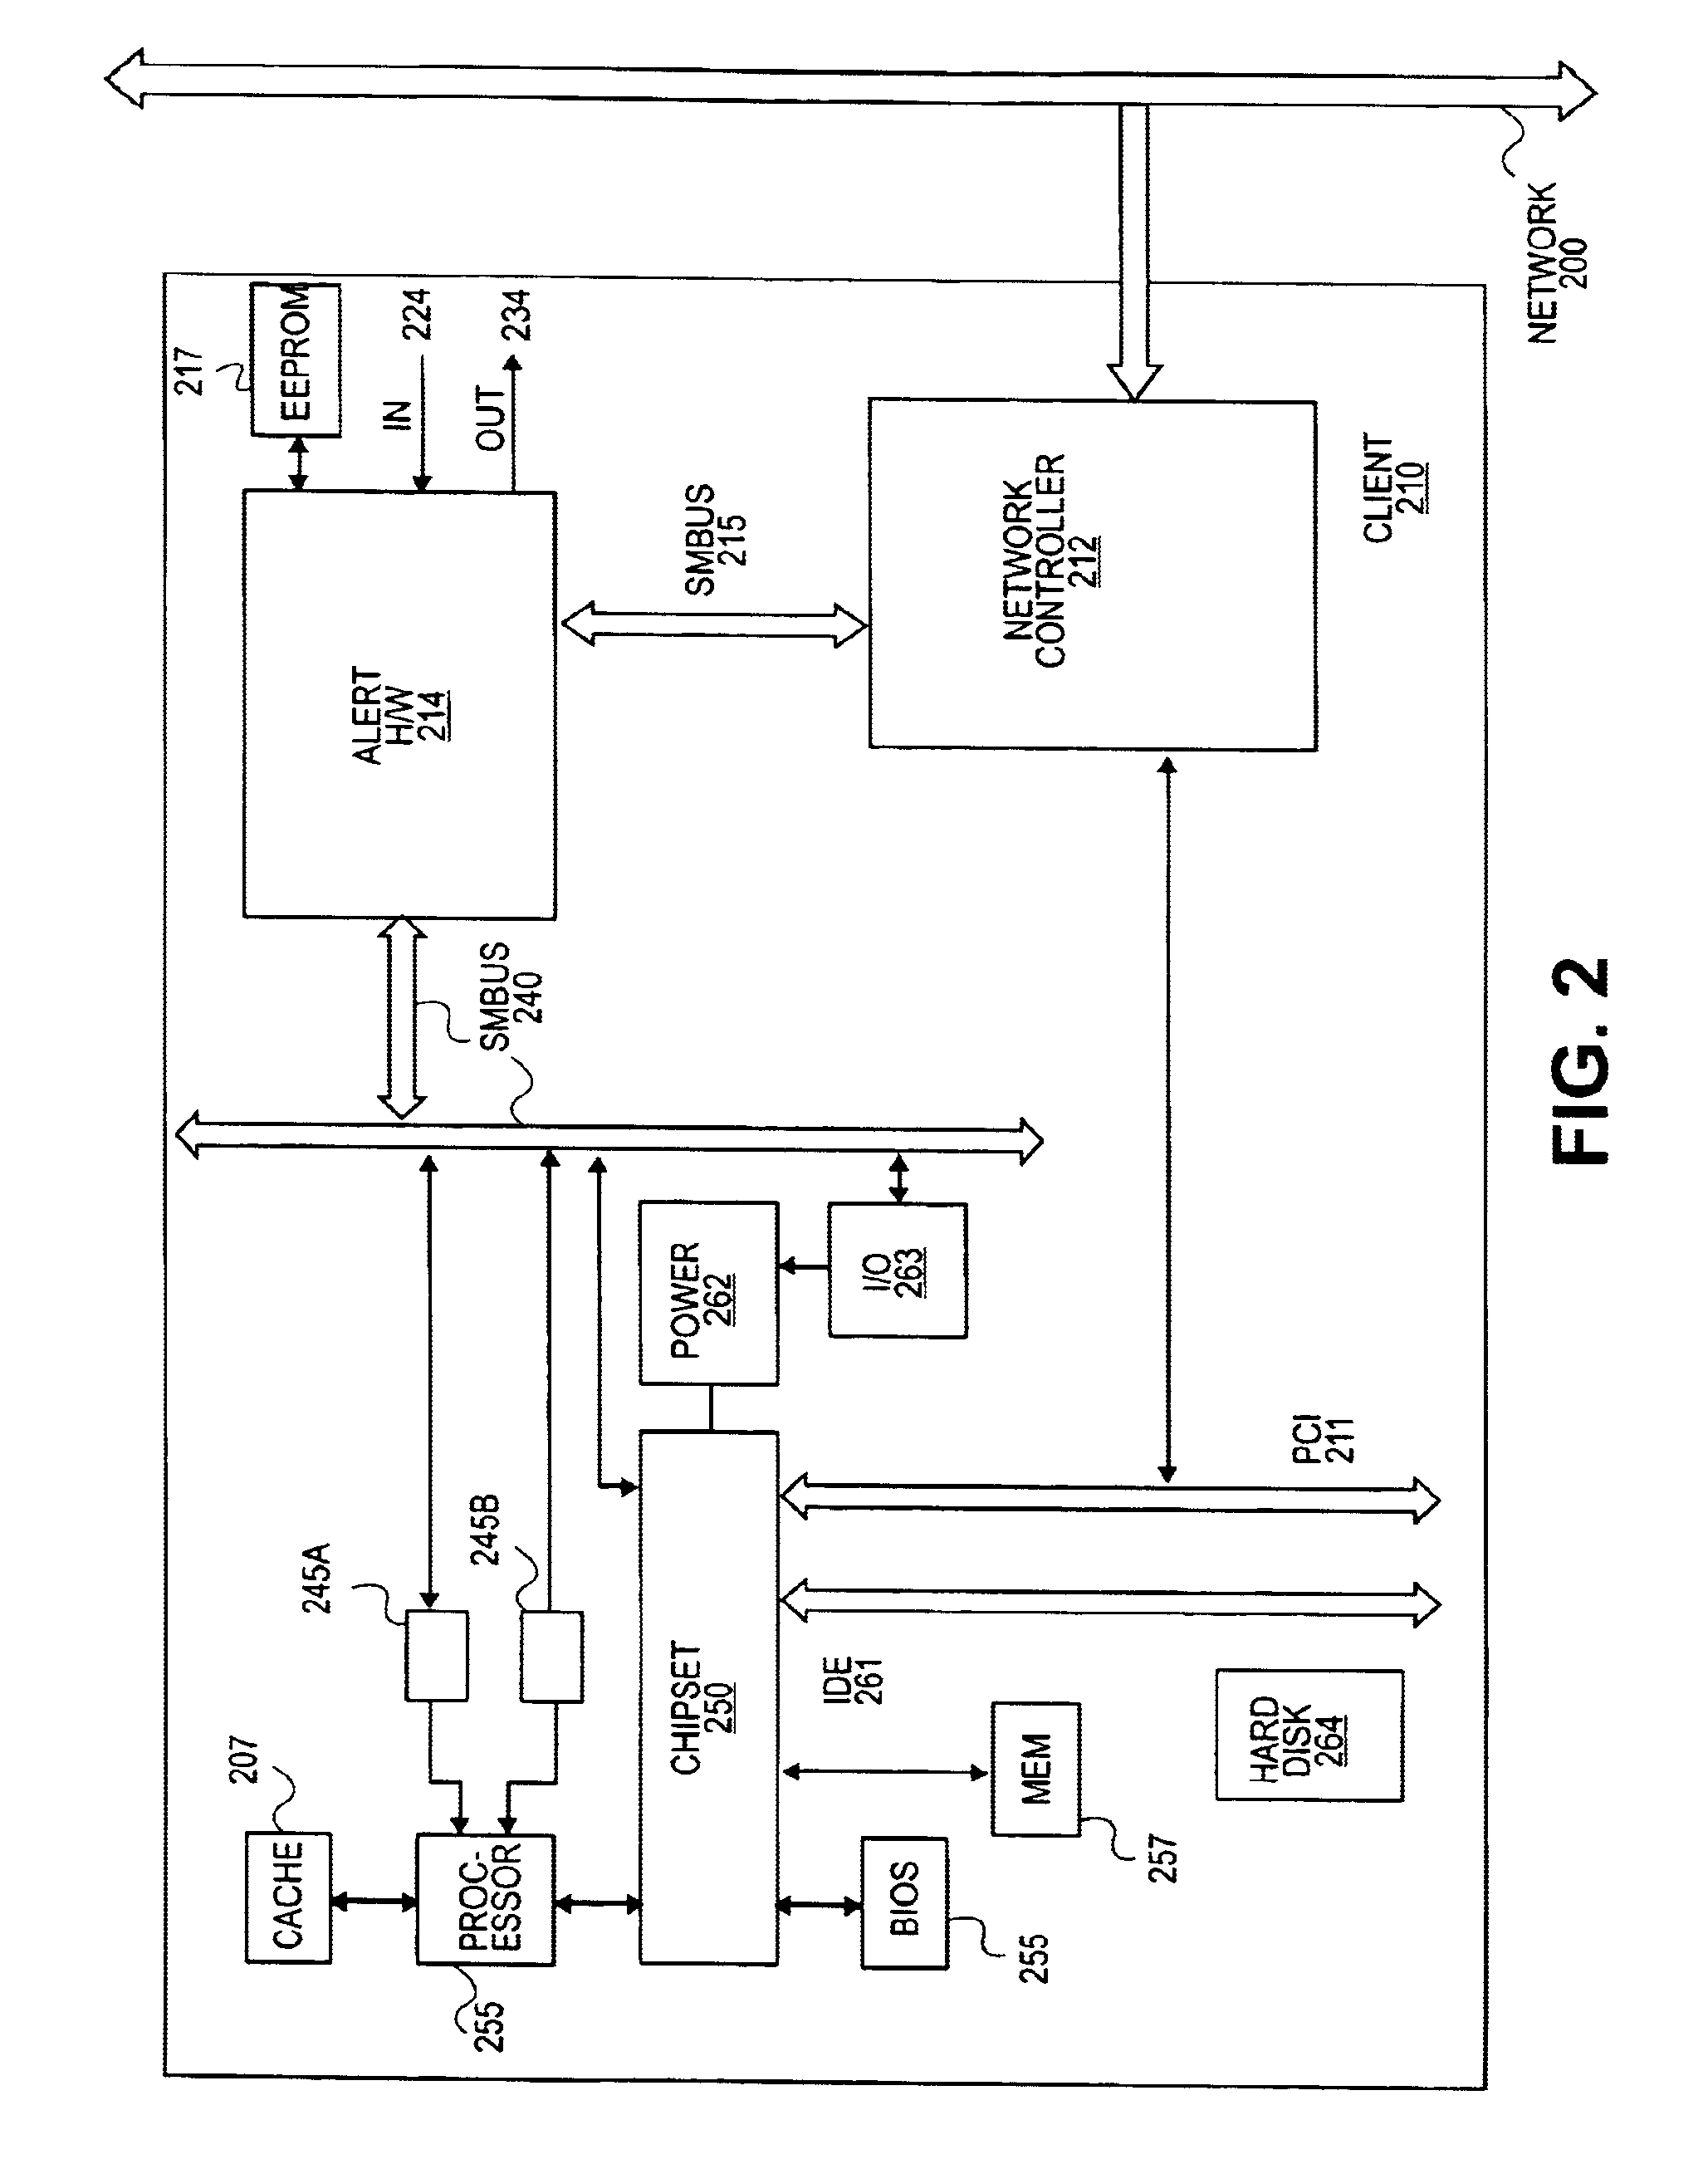 Method and apparatus for dynamic network configuration of an alert-based client